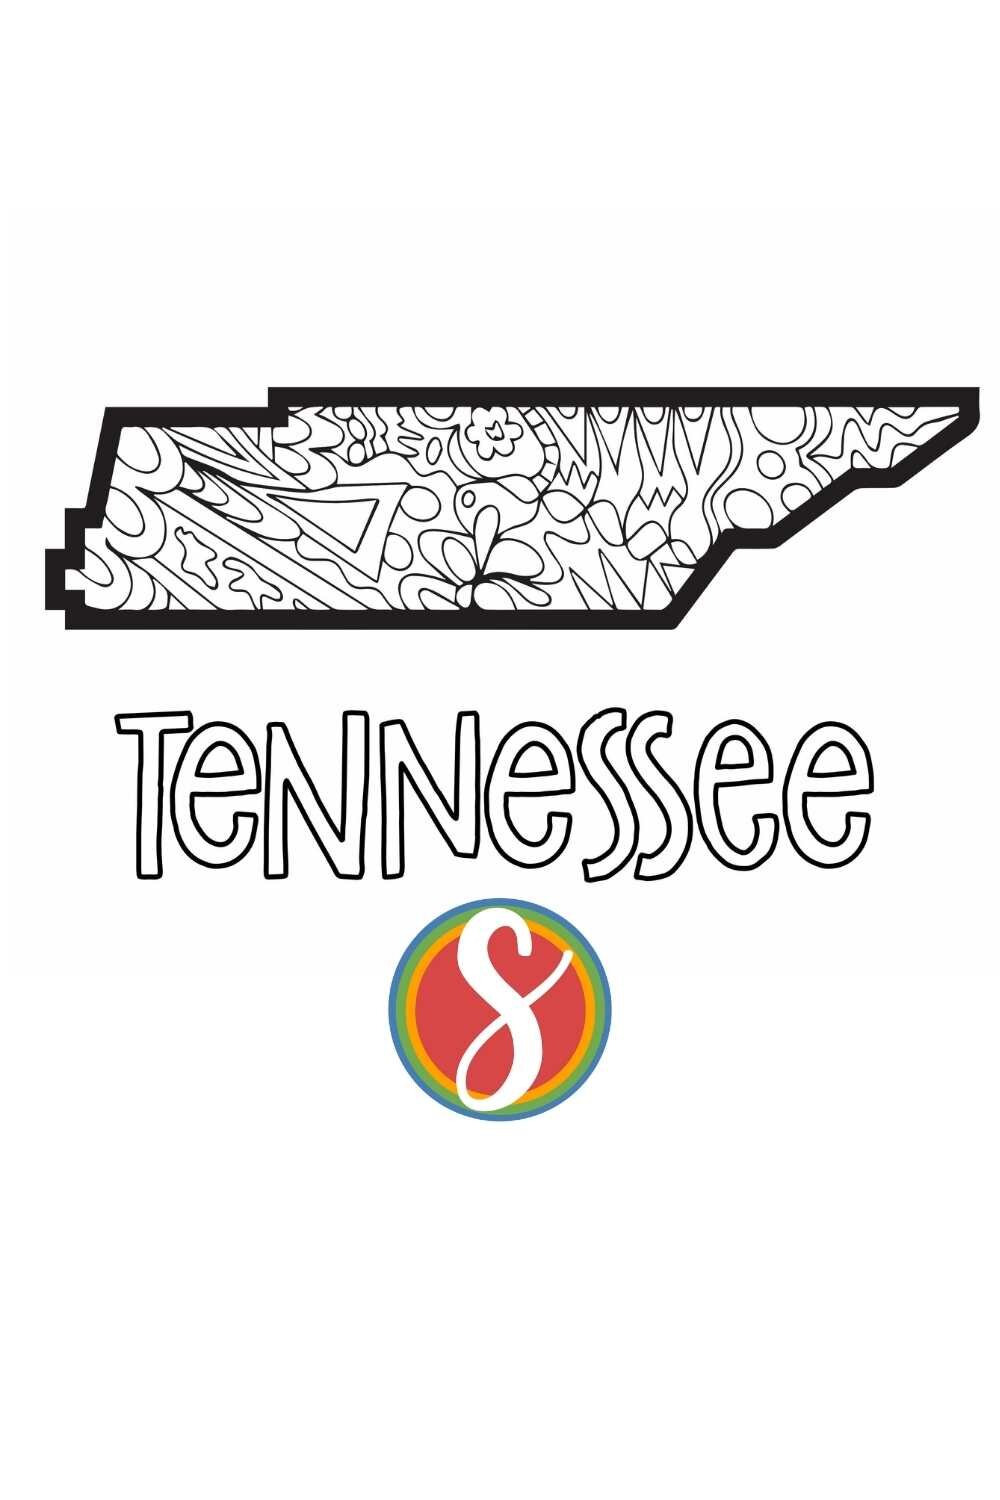 Free printable Tennessee  coloring page from Stevie Doodles - print and color 4 free Tennessee themed activity pages in this post from Stevie Doodles and find your state too!